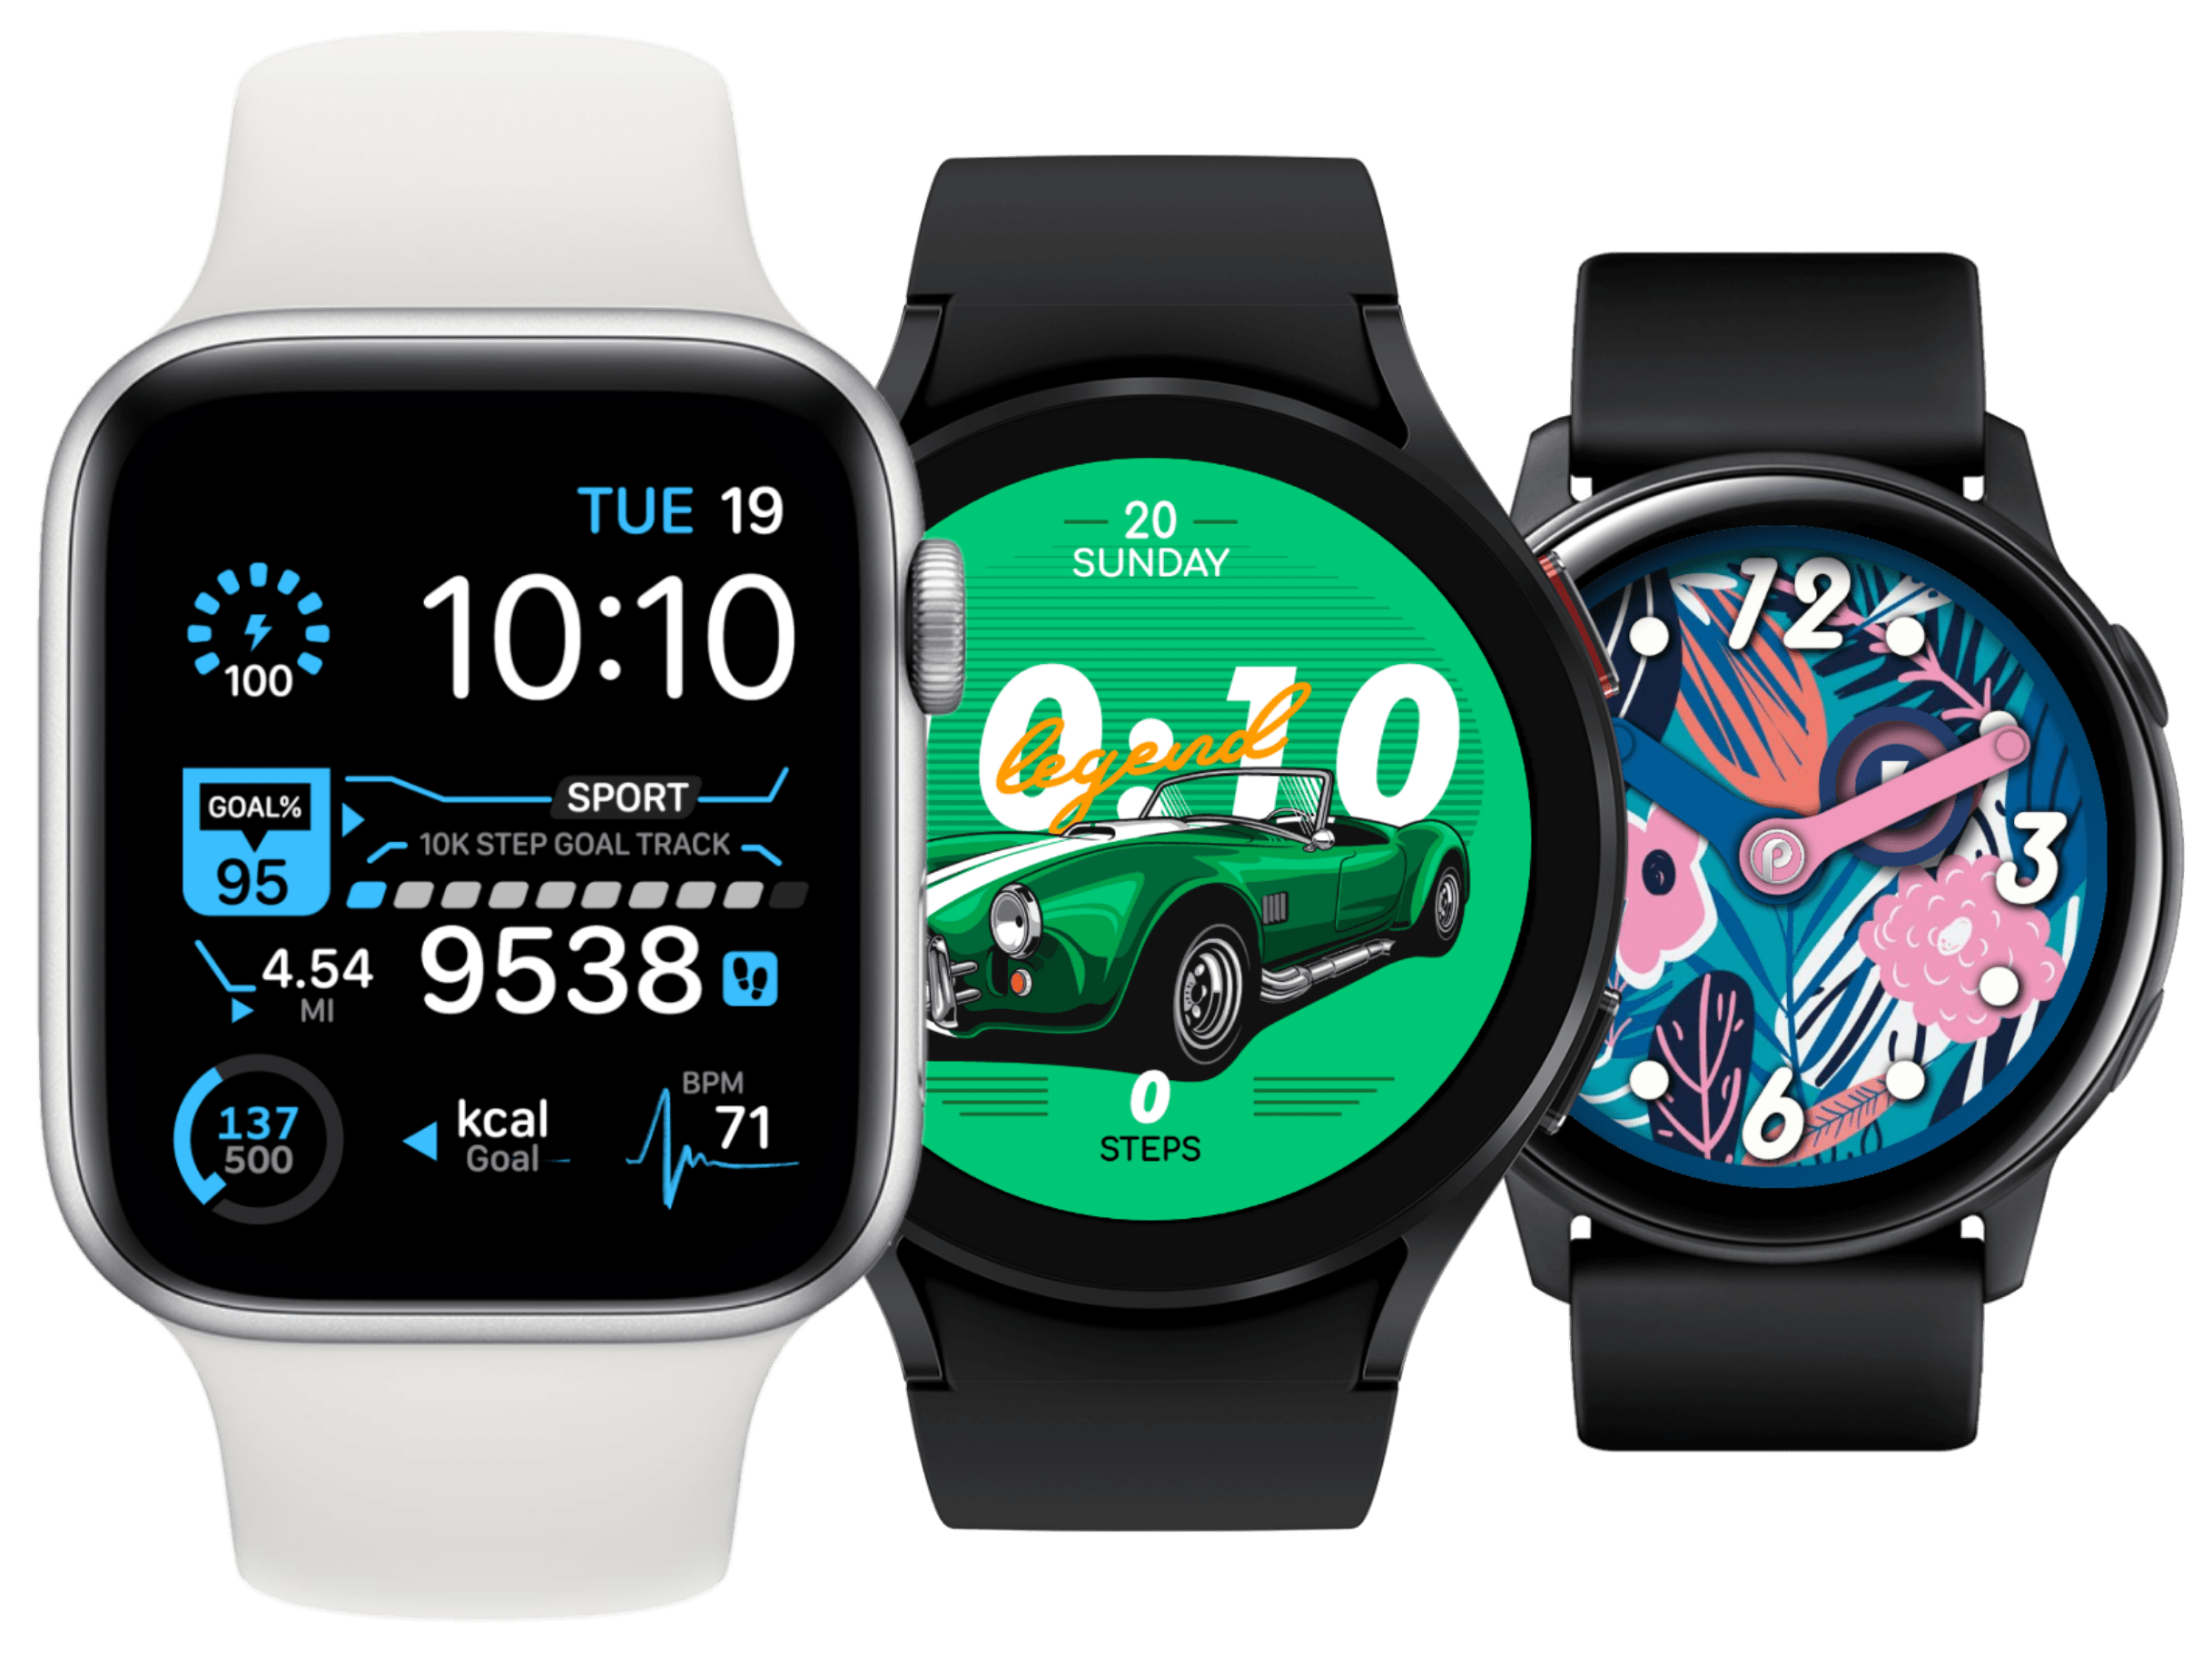 make-your-own-samsung-watch-face-order-sales-save-69-jlcatj-gob-mx